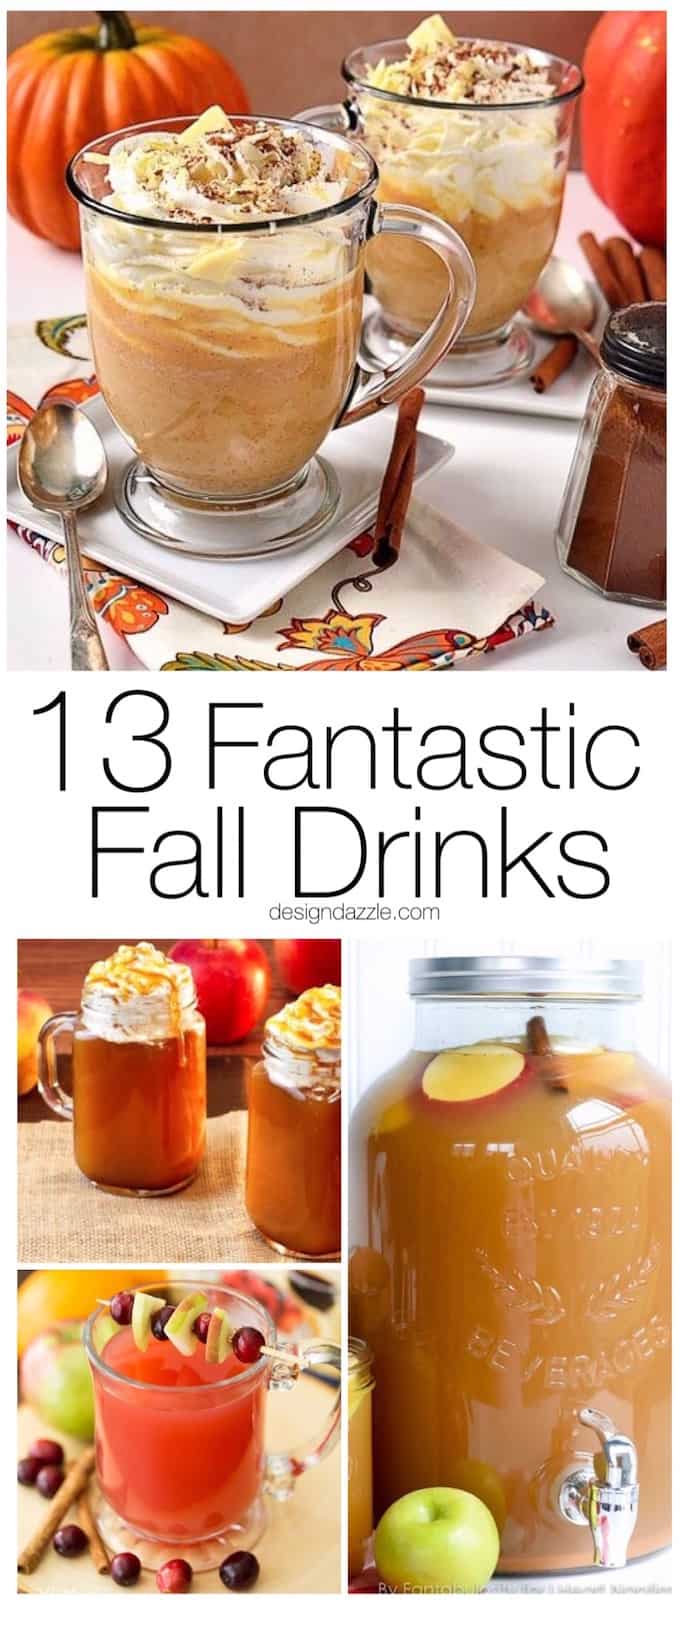 Crisp apples, ripe cranberries and plenty of pumpkin spice go into making these 13 fantastic fall drinks! Nonalcoholic, easy drinks for an extra special treat that will warm your toes. #fall #pumpkinspice #pumpkinrecipes #applecider || Design Dazzle 